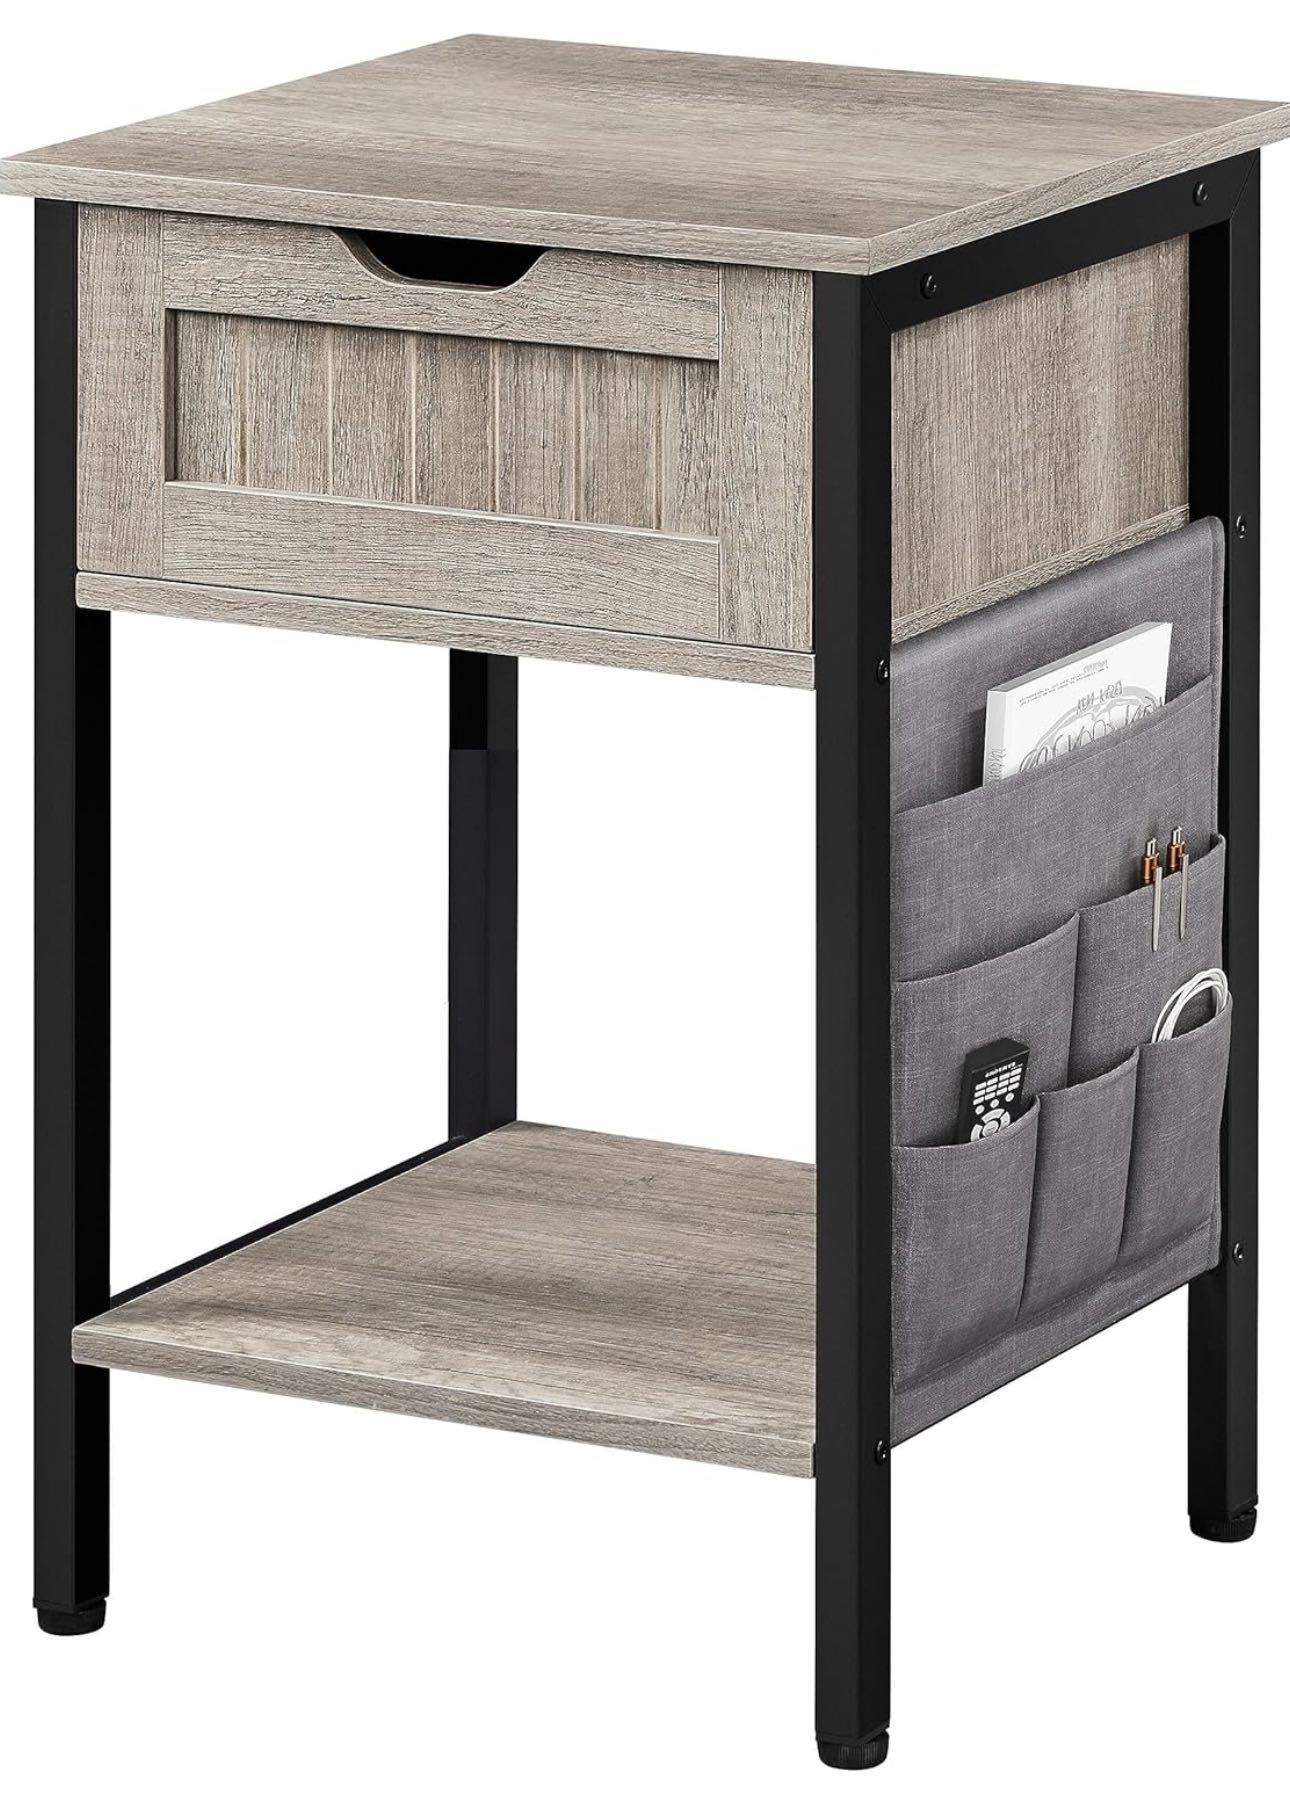 Nightstand with Storage Drawer and Shelf, Bedside Table with Removable Bag, Wooden Bedside Cupboard Sofa Side Table with Steel Legs for Bedroom/Small 